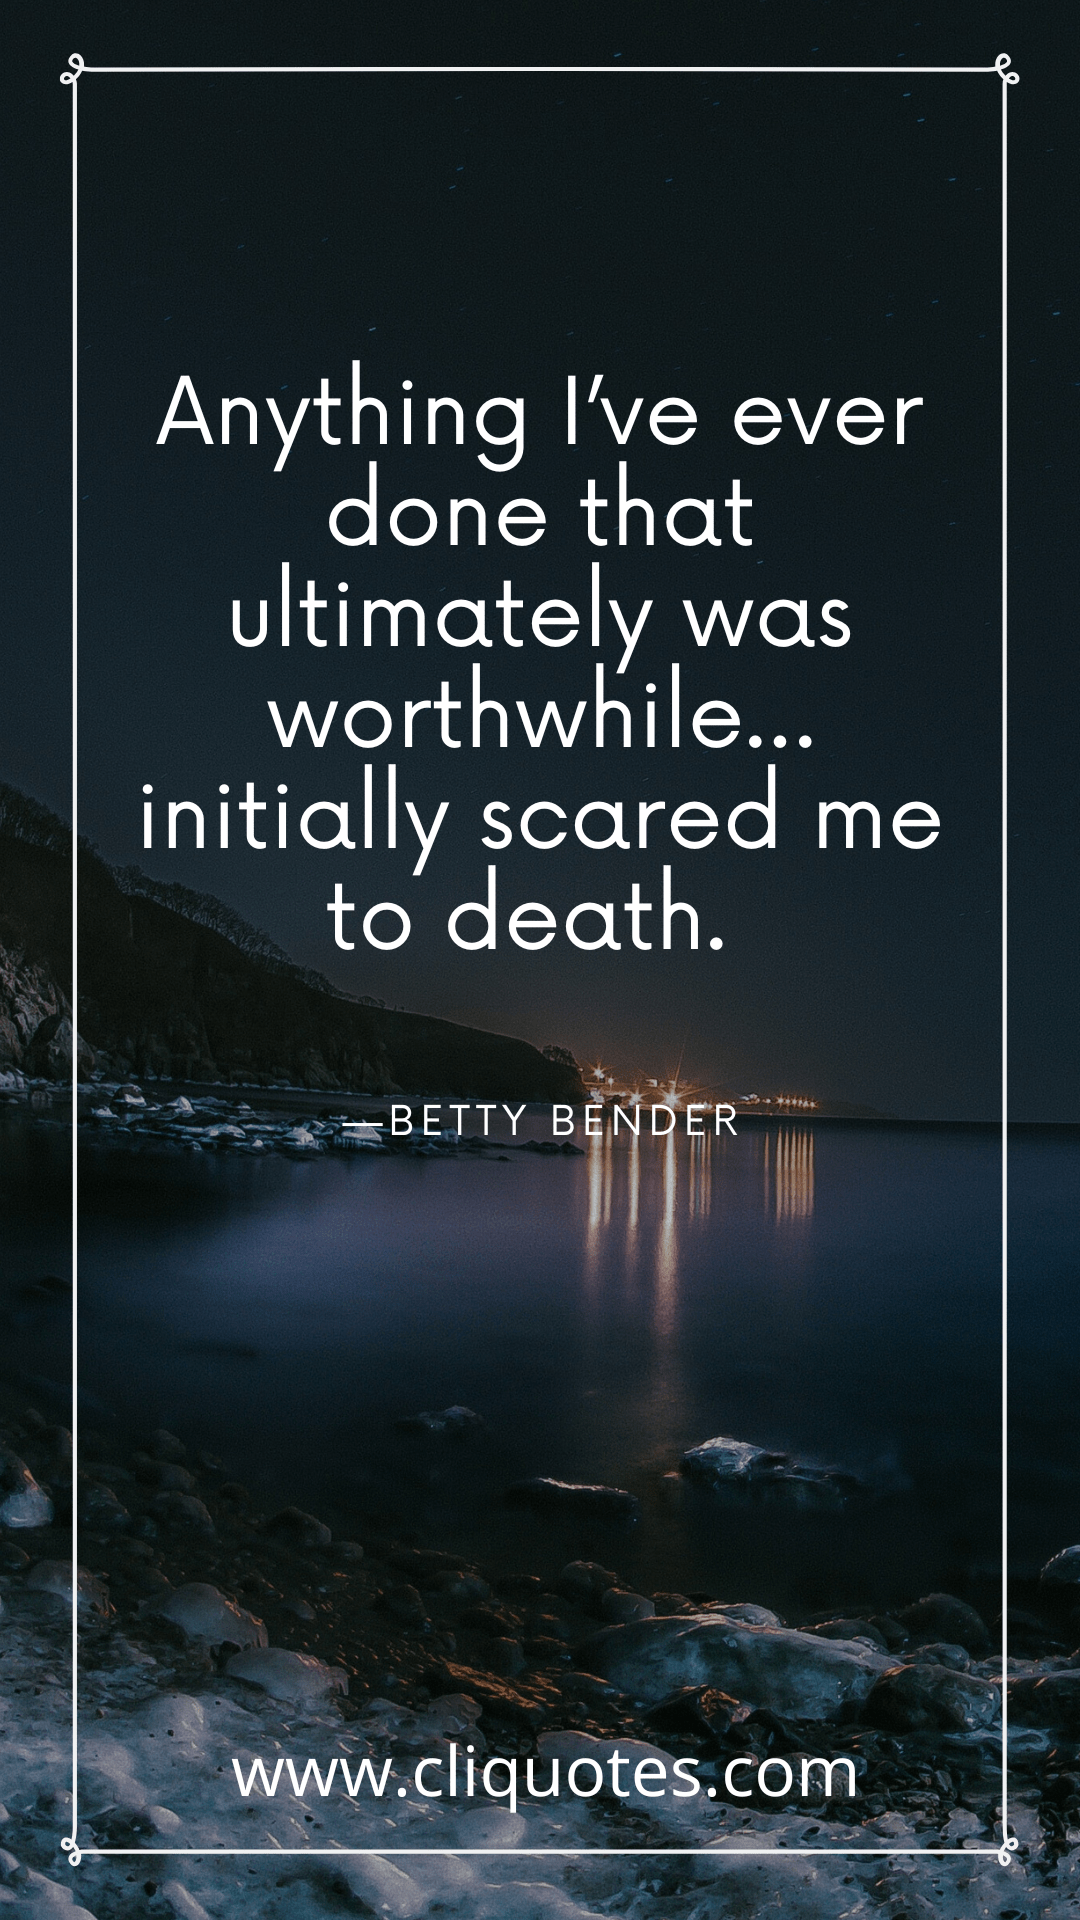 Anything I’ve ever done that ultimately was worthwhile… initially scared me to death. —BETTY BENDER